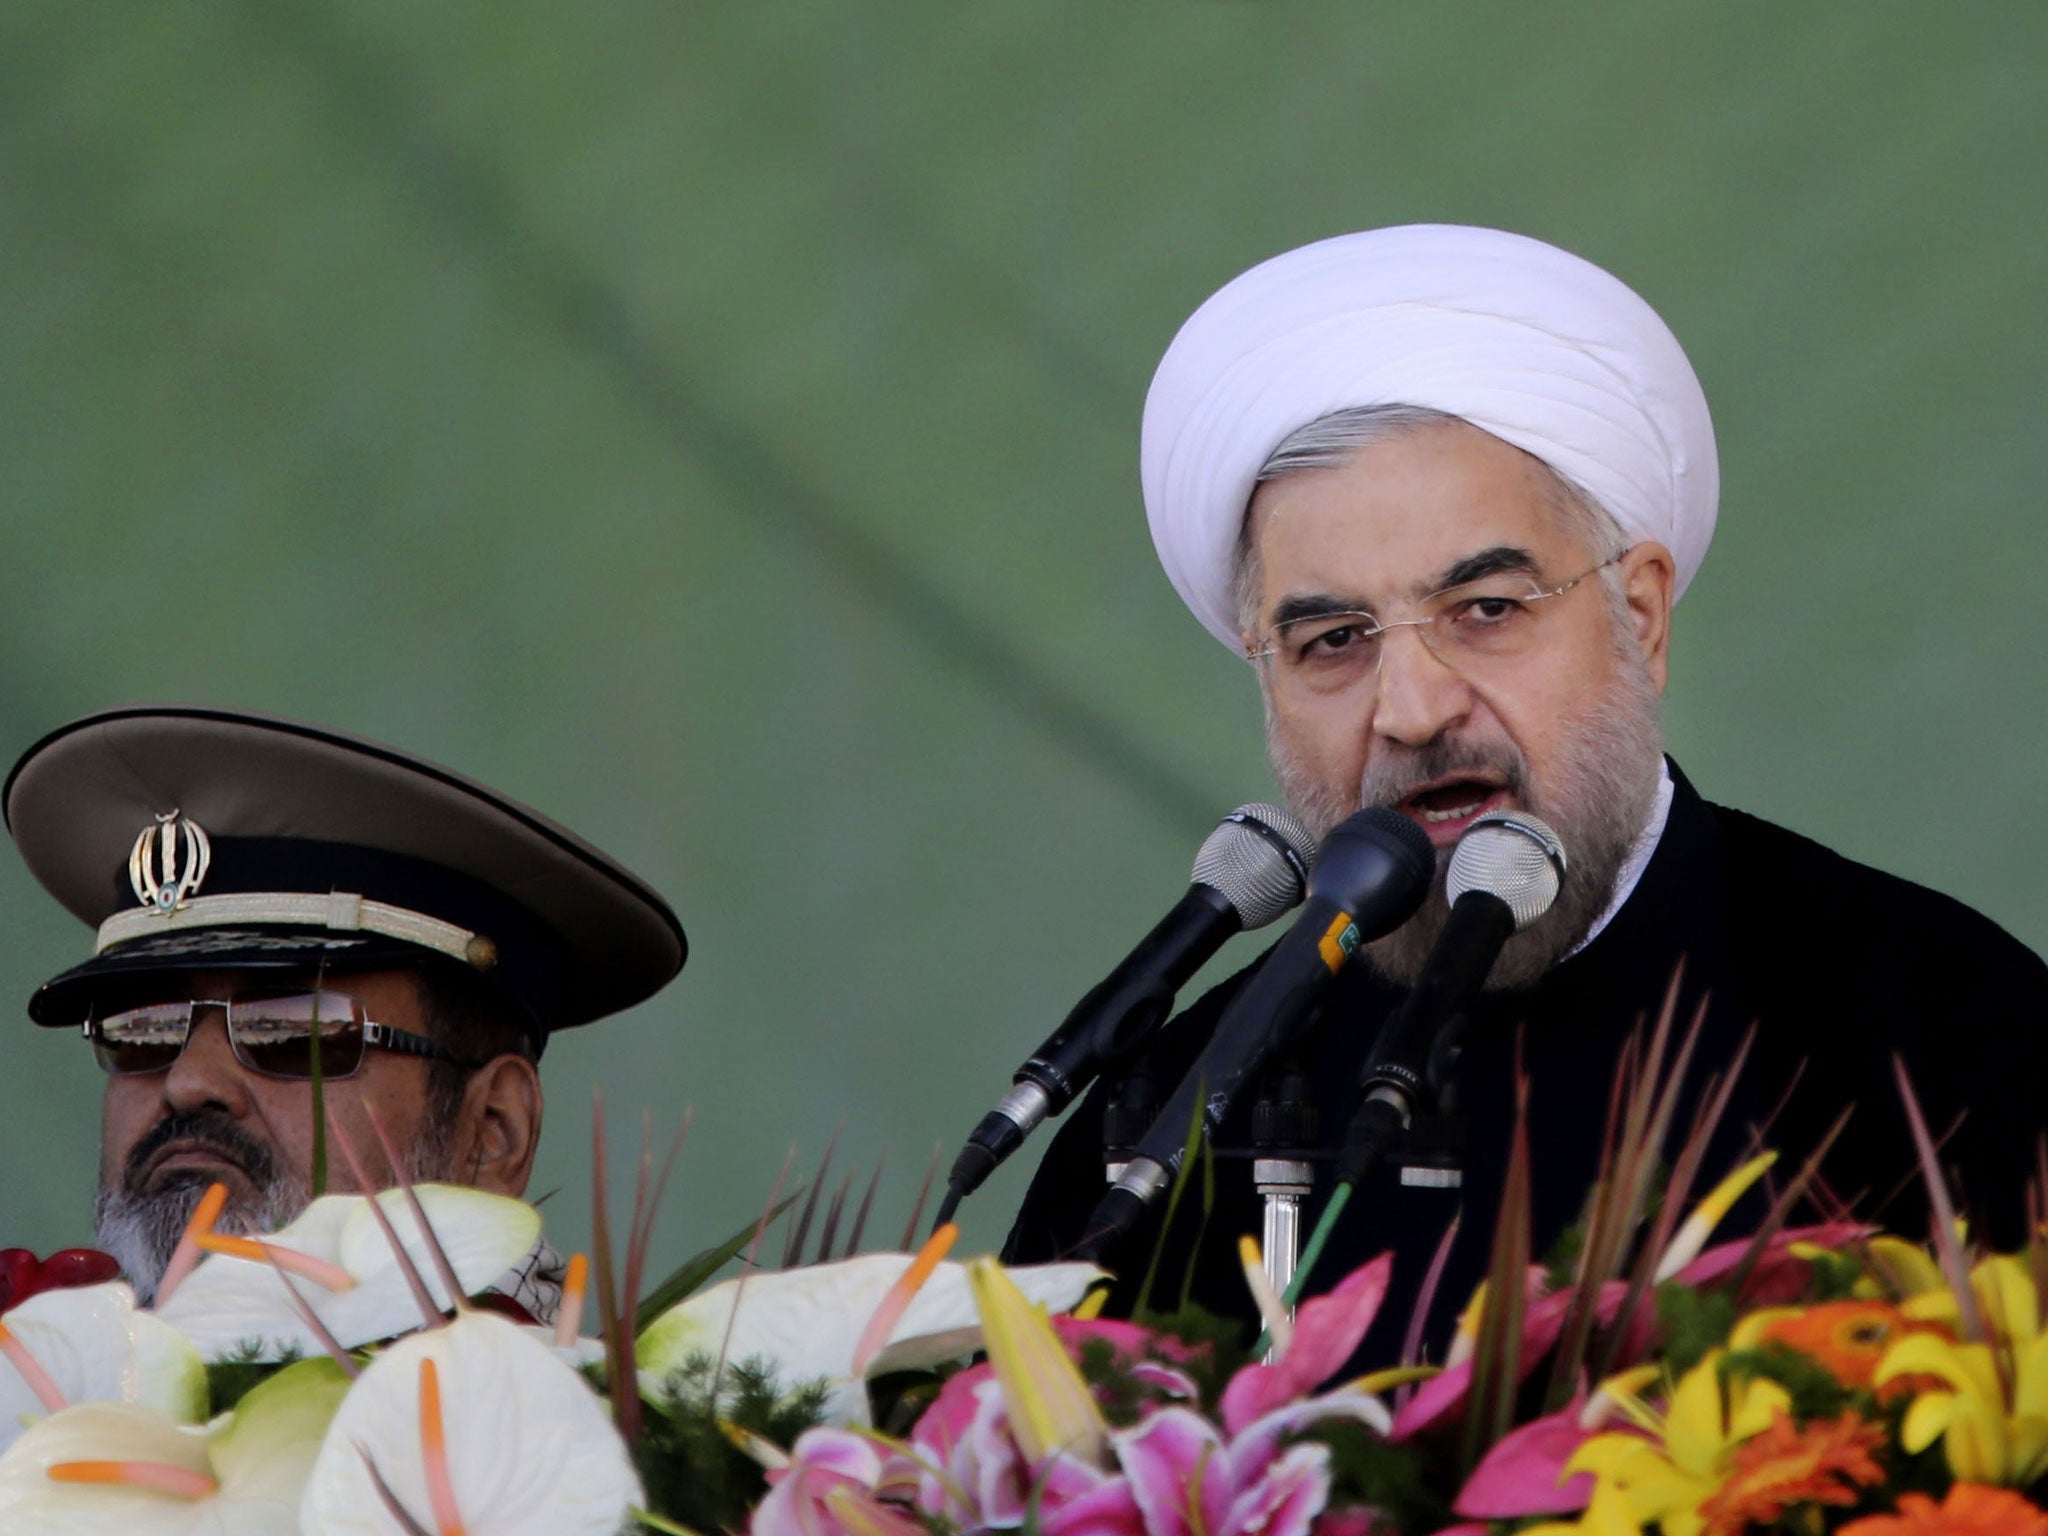 Iran's President Hassan Rouhani, gives a speech during an annual military parade in Tehran, Iran